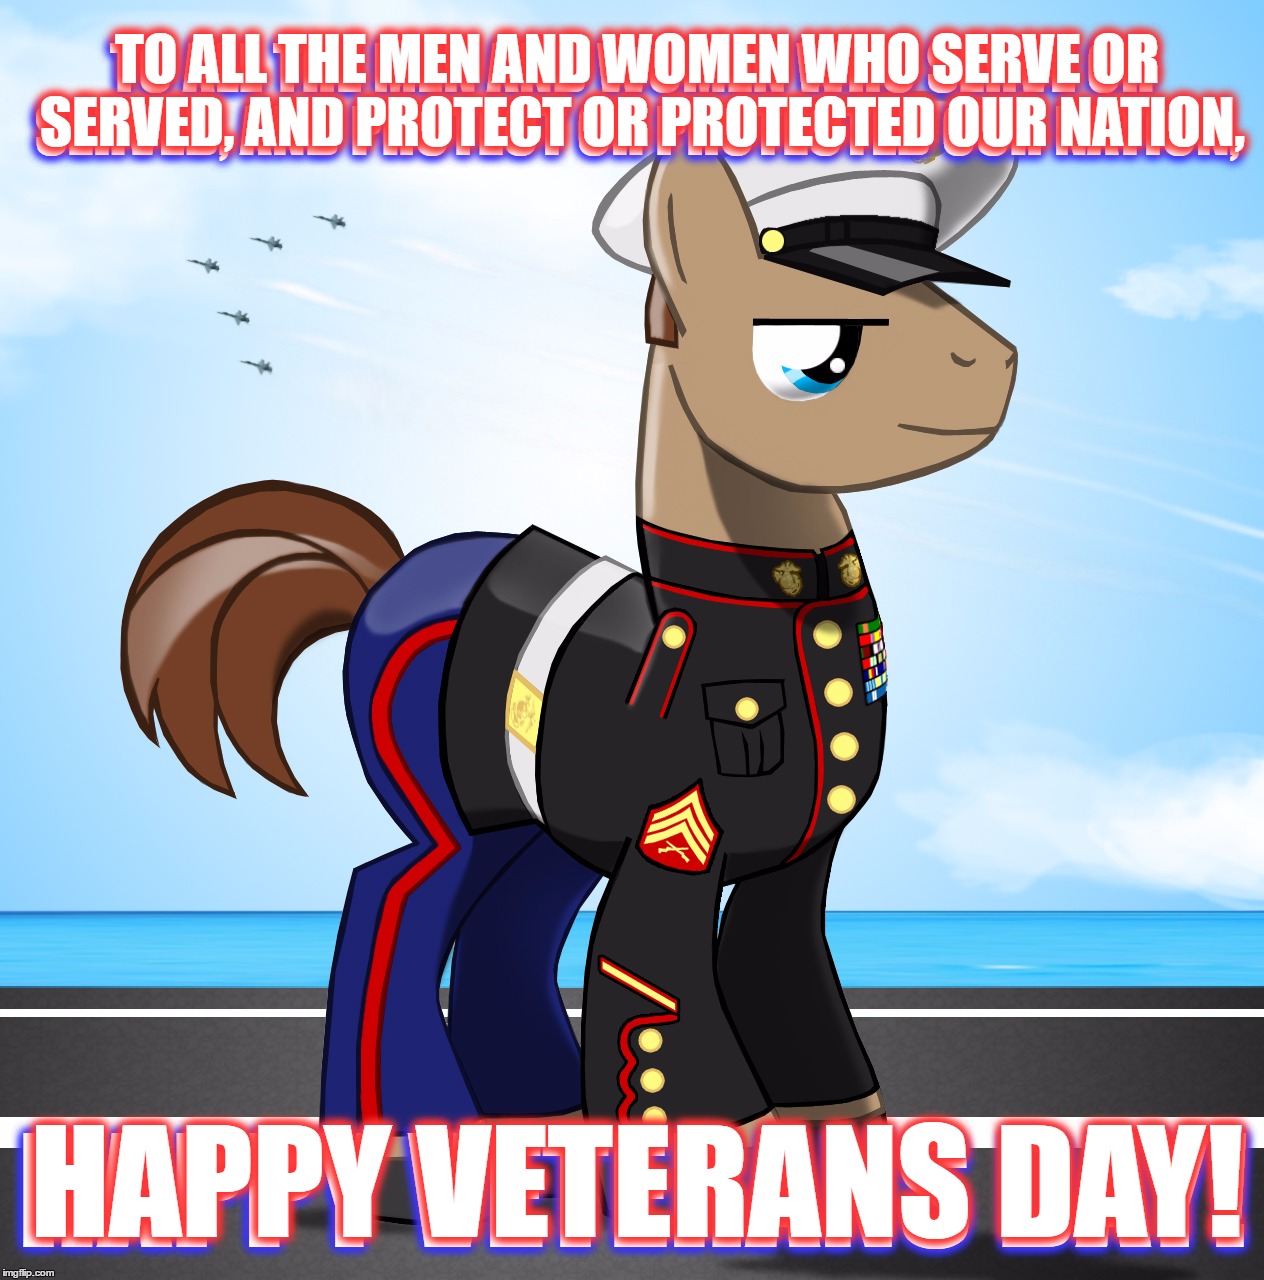 Happy Veterans Day Everyone (Or Everypony)! | TO ALL THE MEN AND WOMEN WHO SERVE OR SERVED, AND PROTECT OR PROTECTED OUR NATION, TO ALL THE MEN AND WOMEN WHO SERVE OR SERVED, AND PROTECT OR PROTECTED OUR NATION, HAPPY VETERANS DAY! HAPPY VETERANS DAY! | image tagged in memes,veterans day,happy veterans day,thank you,service,nation | made w/ Imgflip meme maker